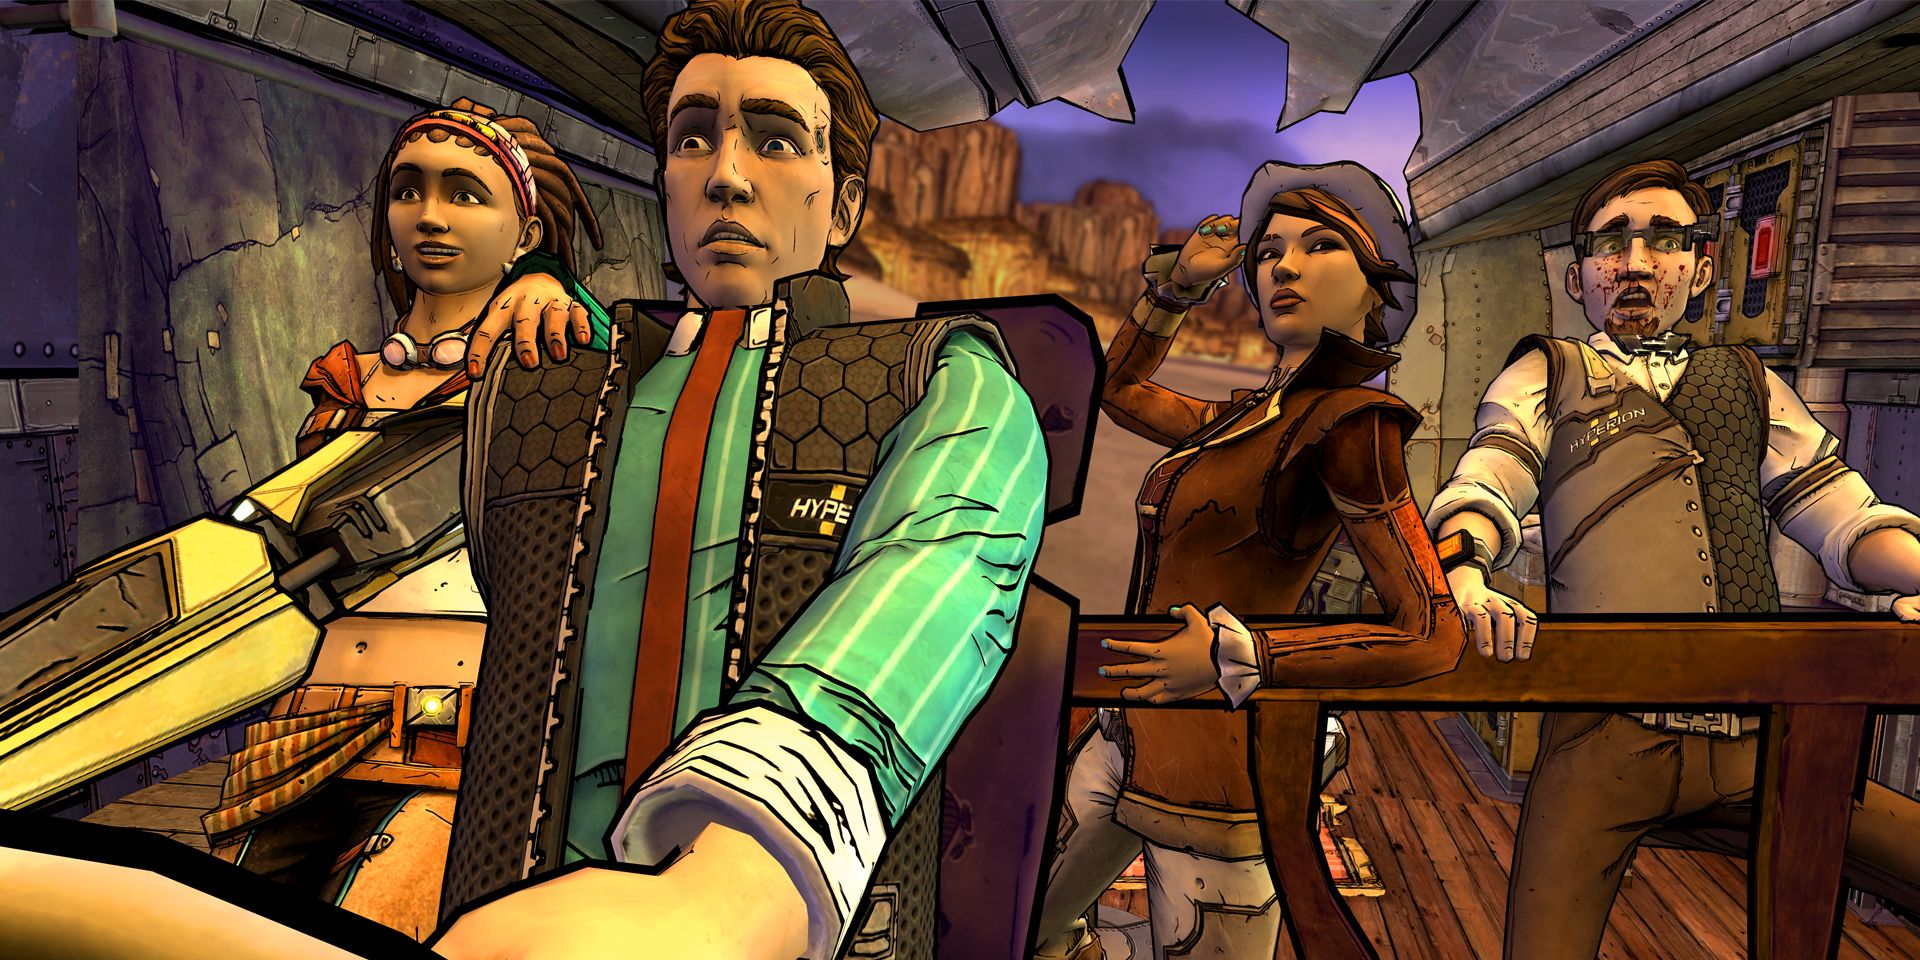 Sasha, Rhys, Fiona, and Vaughn struggle to drive in Tales from the Borderlands